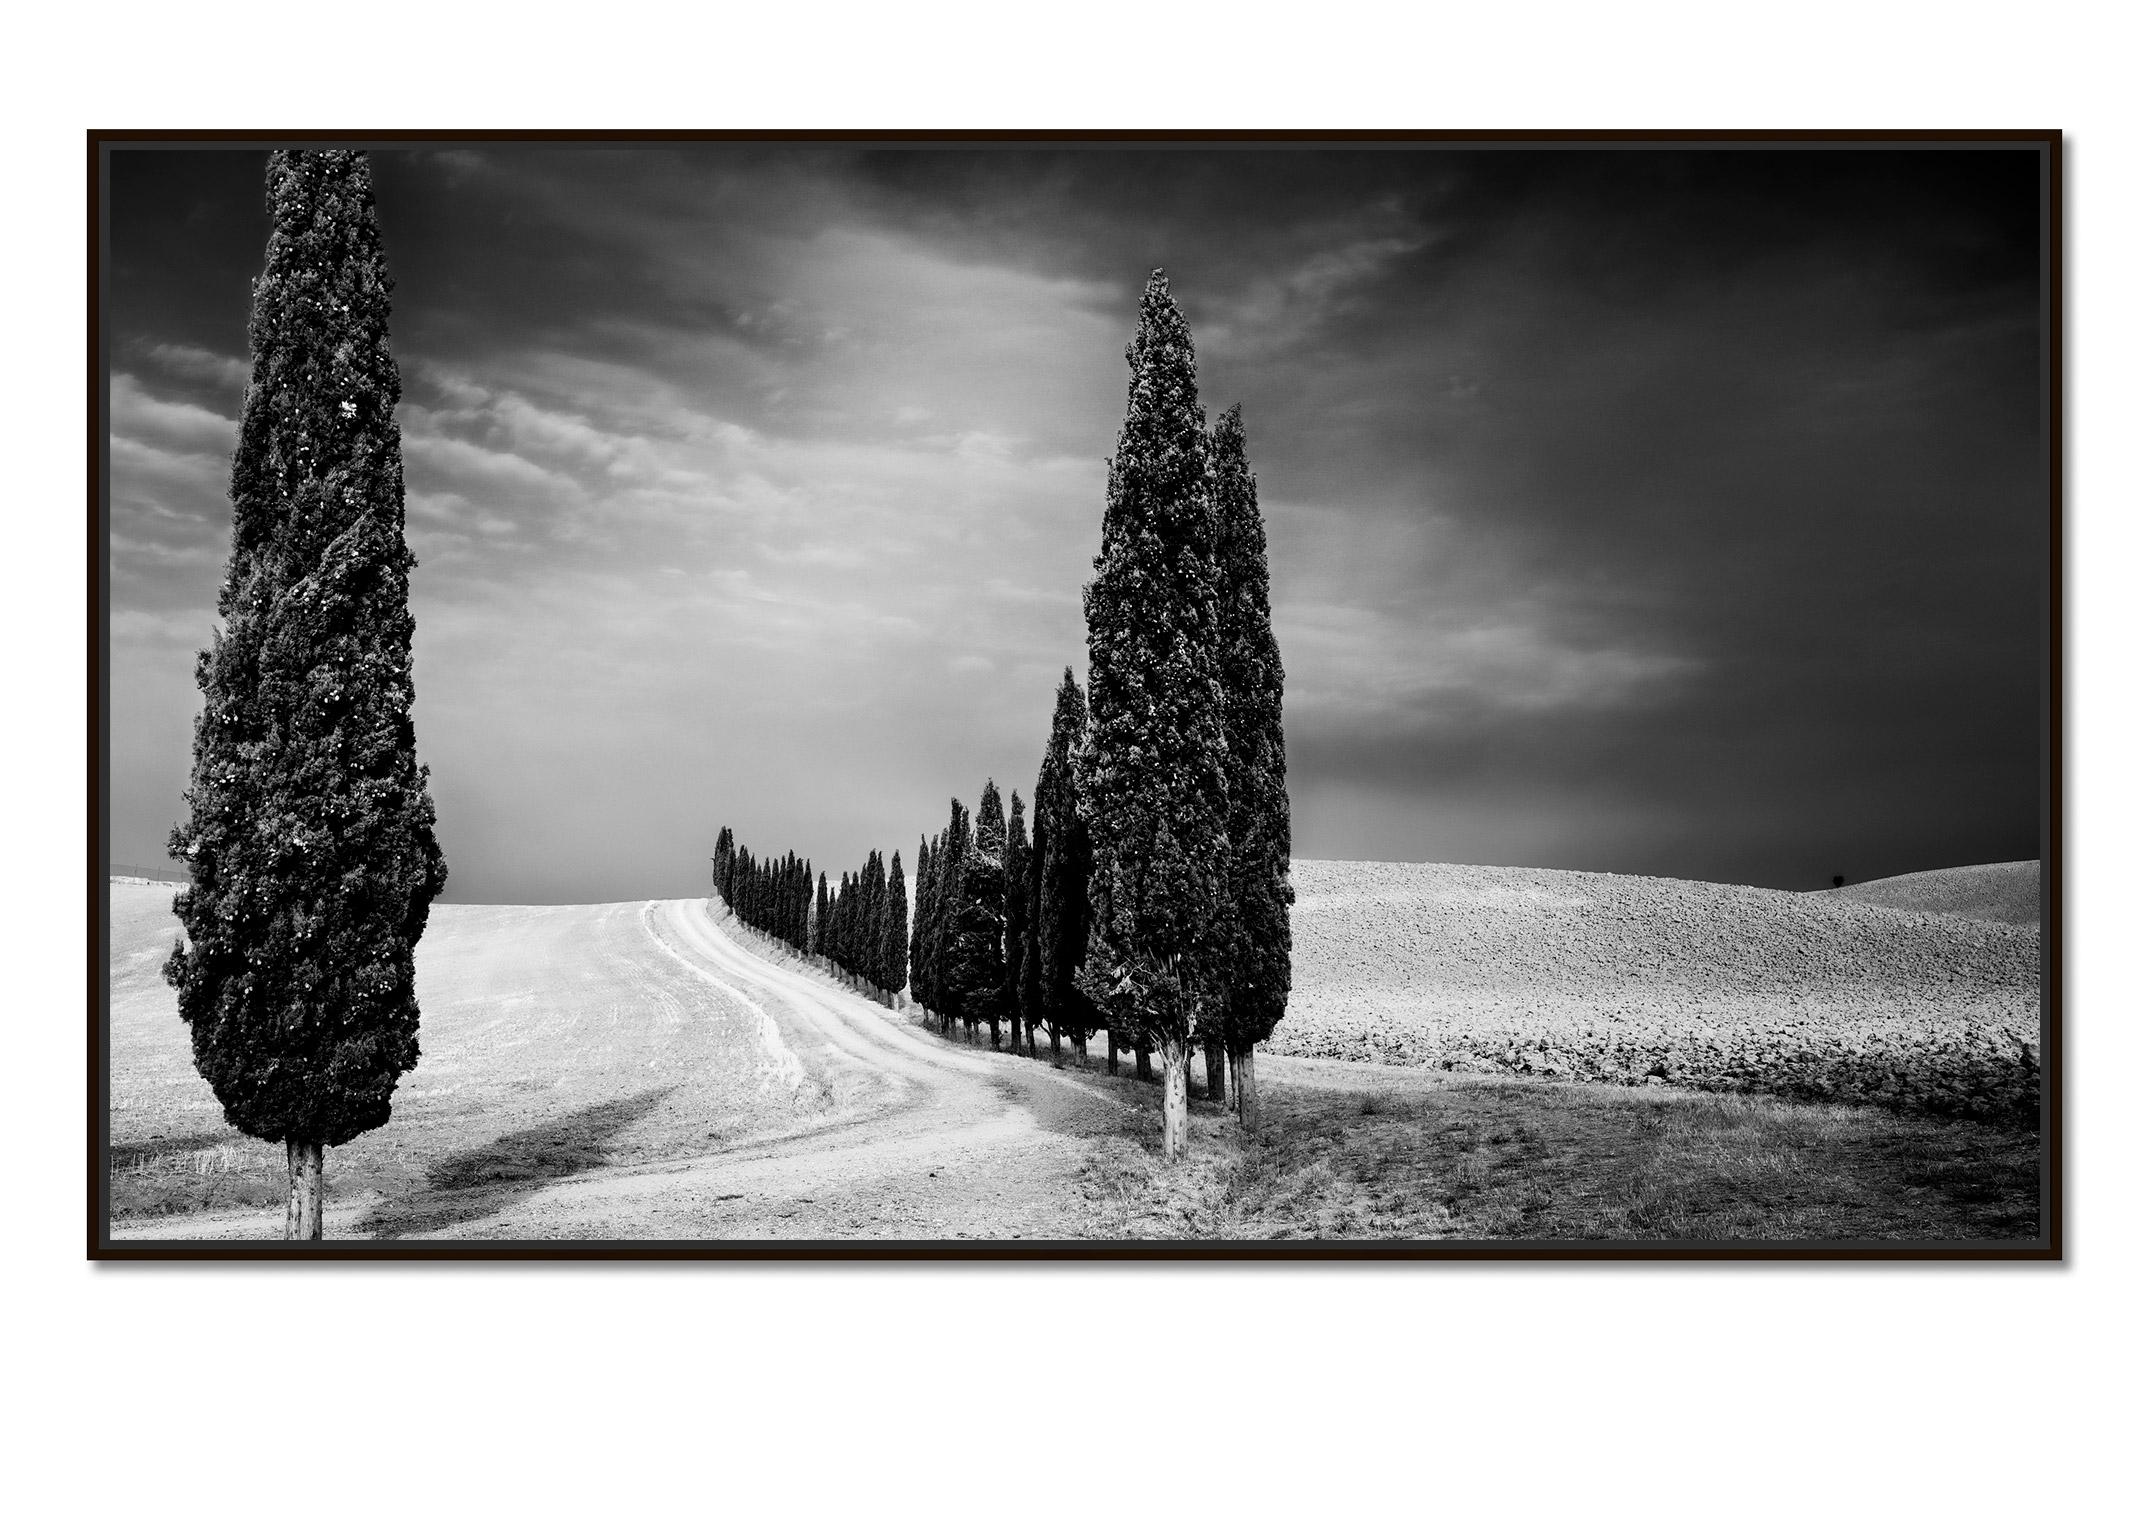 Cypress Trees Avenue Panorama Tuscany black white fine art landscape photography - Photograph by Gerald Berghammer